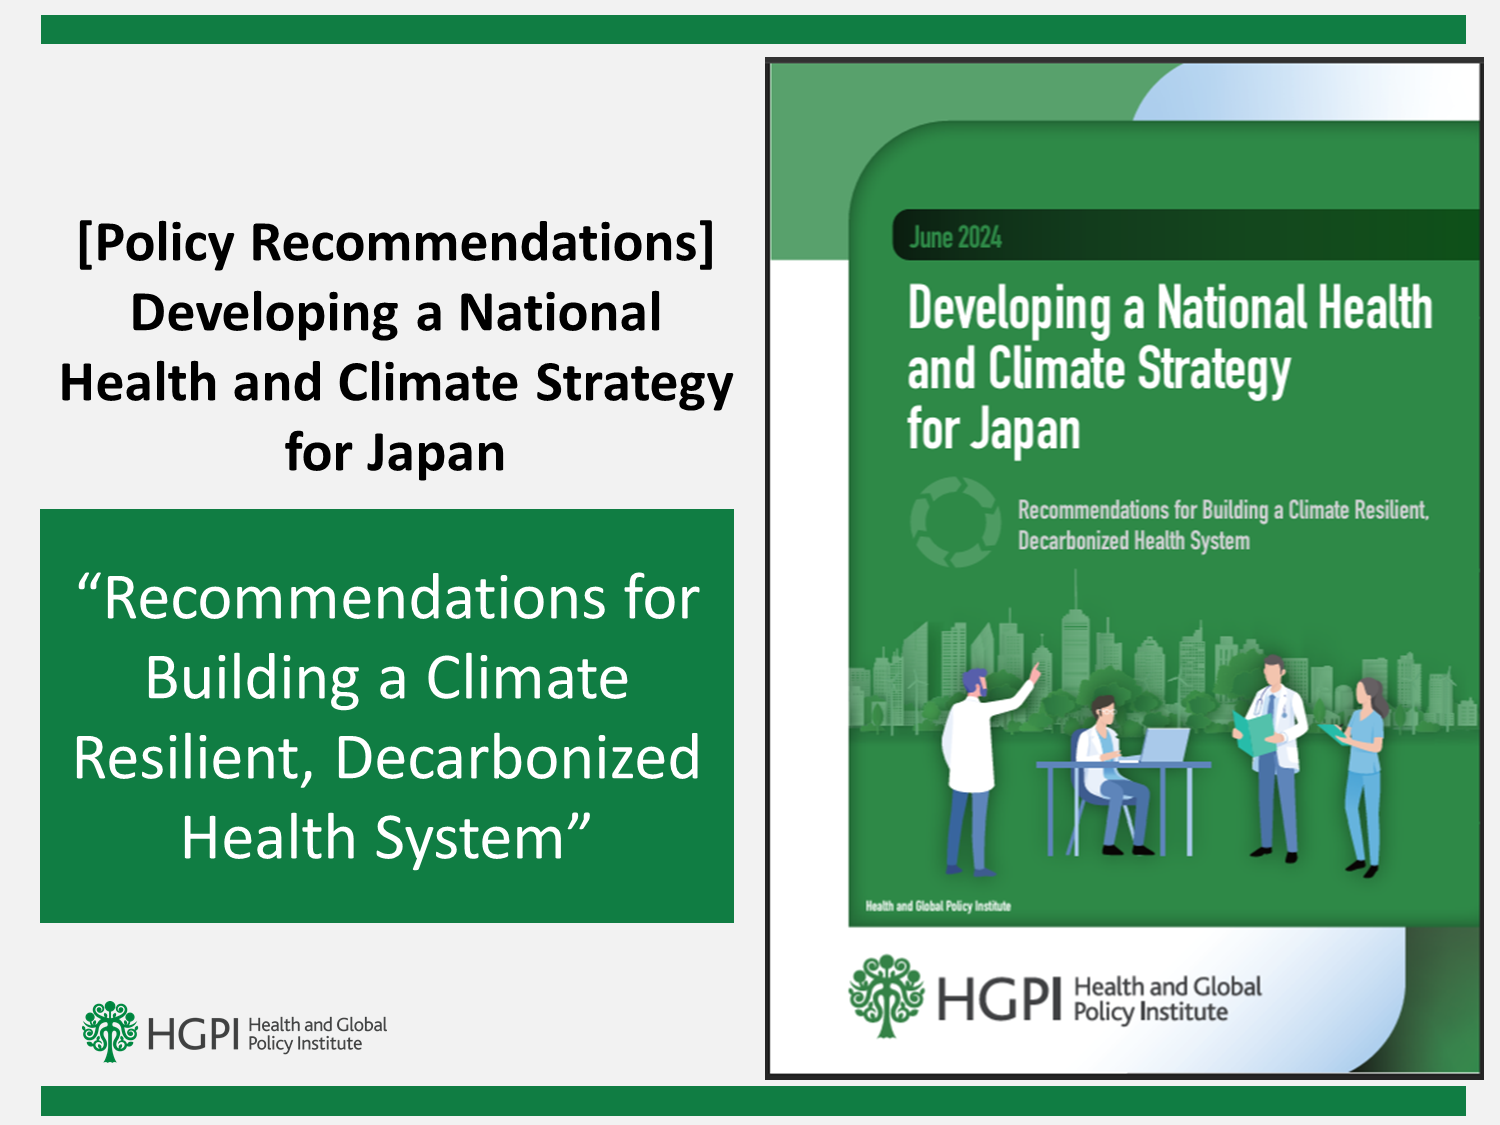 [Policy Recommendations] 日本における国家健康と気候変動戦略の策定 (2024 年 6 月 26 日) – Health and Global Policy Institute (HGPI) 世界的な保健政策のシンクタンク。